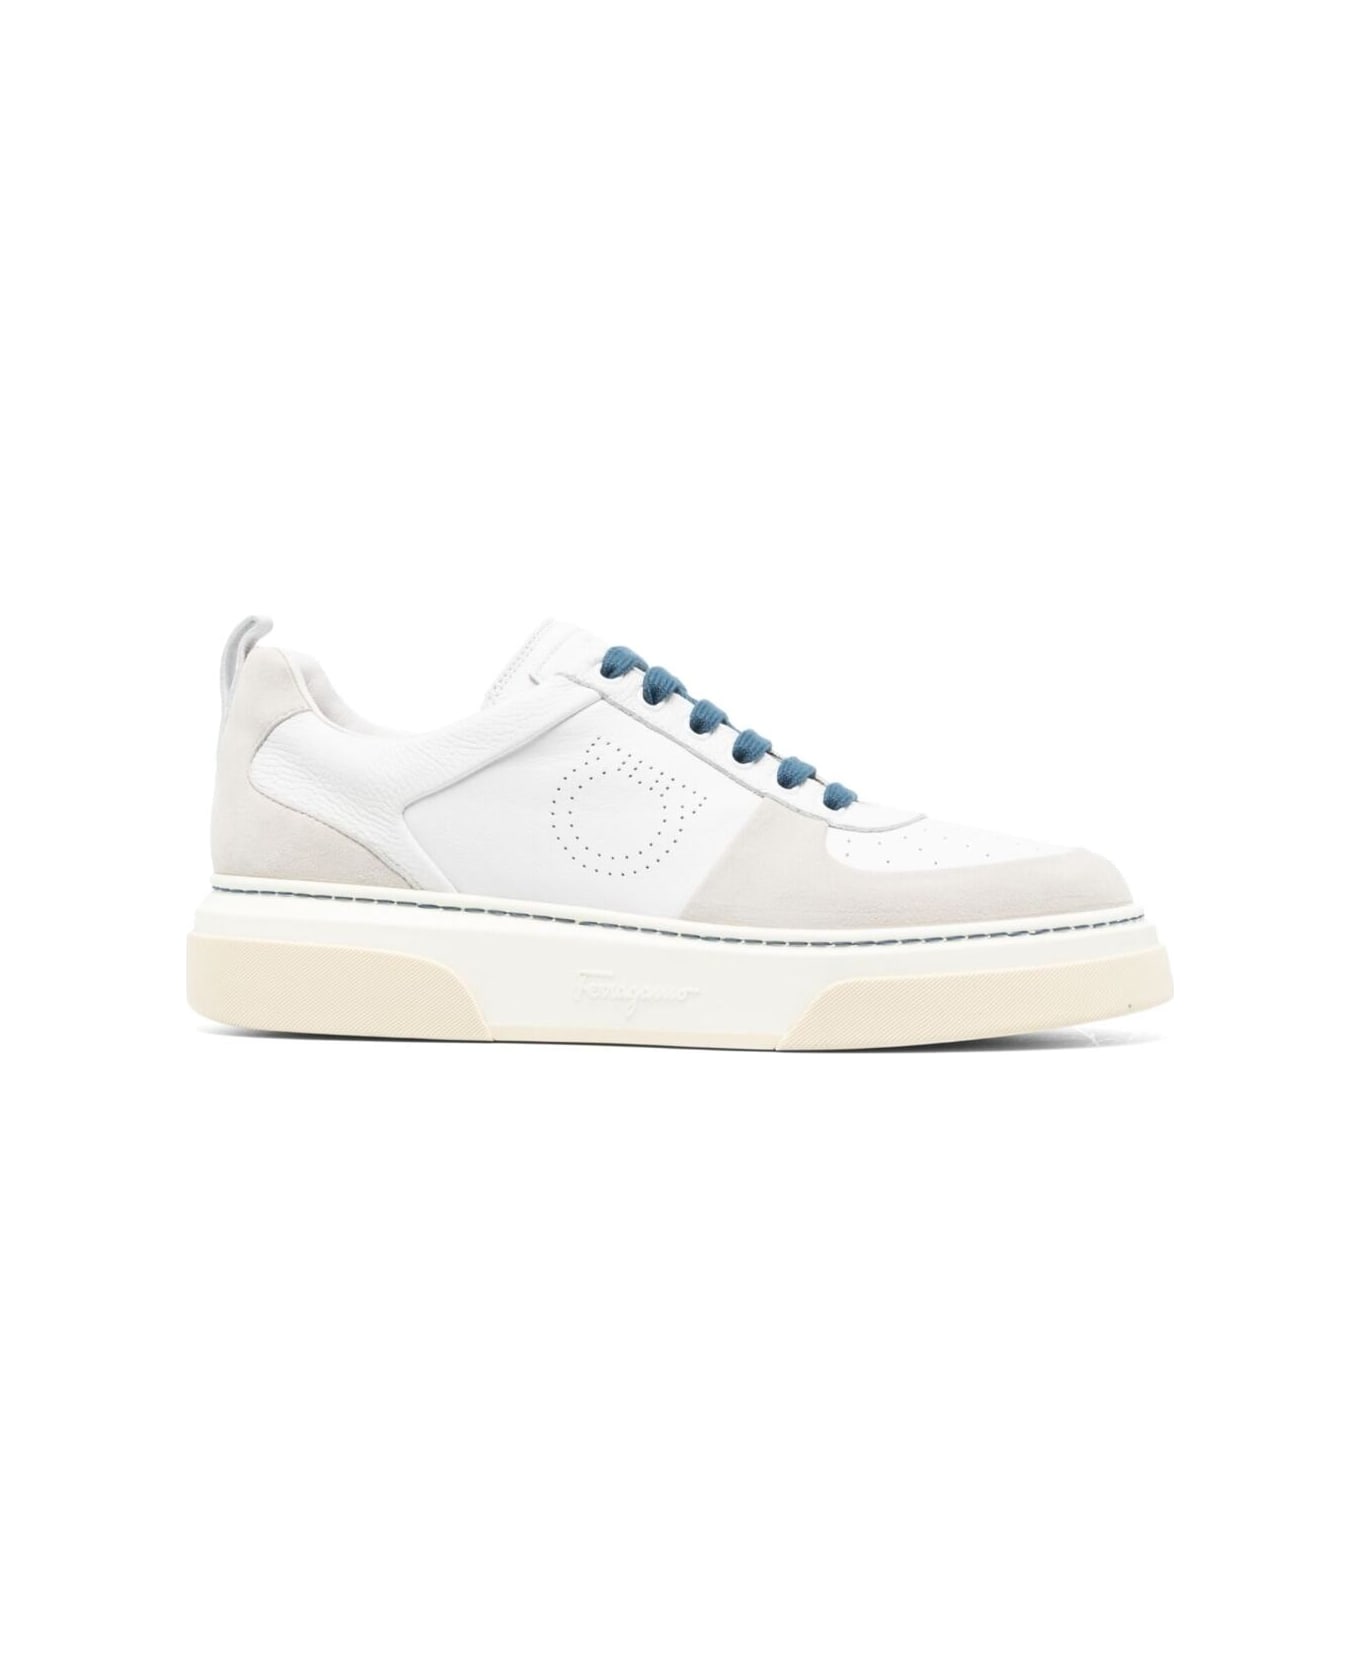 Ferragamo 'cassina' Beige Low Top Sneakers With Gancini And Suede Details In Leather Man - White